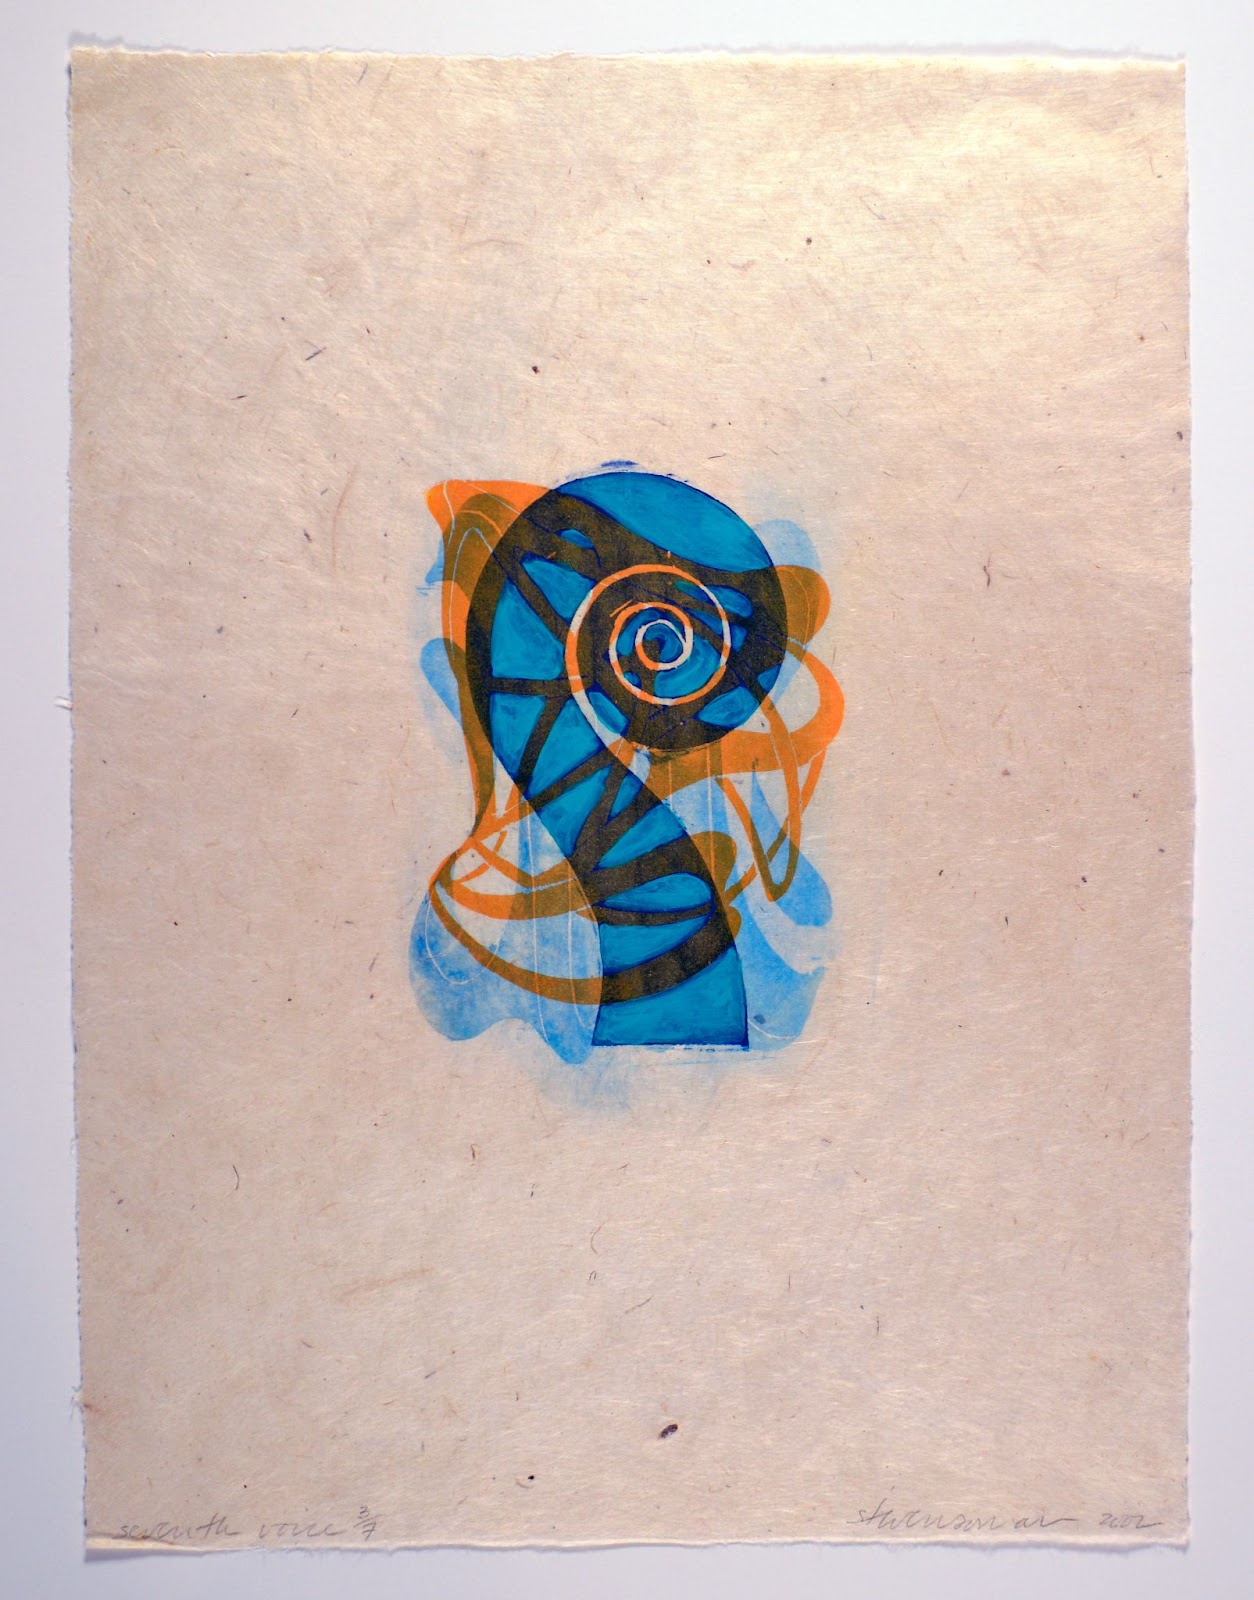 An abstract print with waves and swirl patterns in blue and orange. 